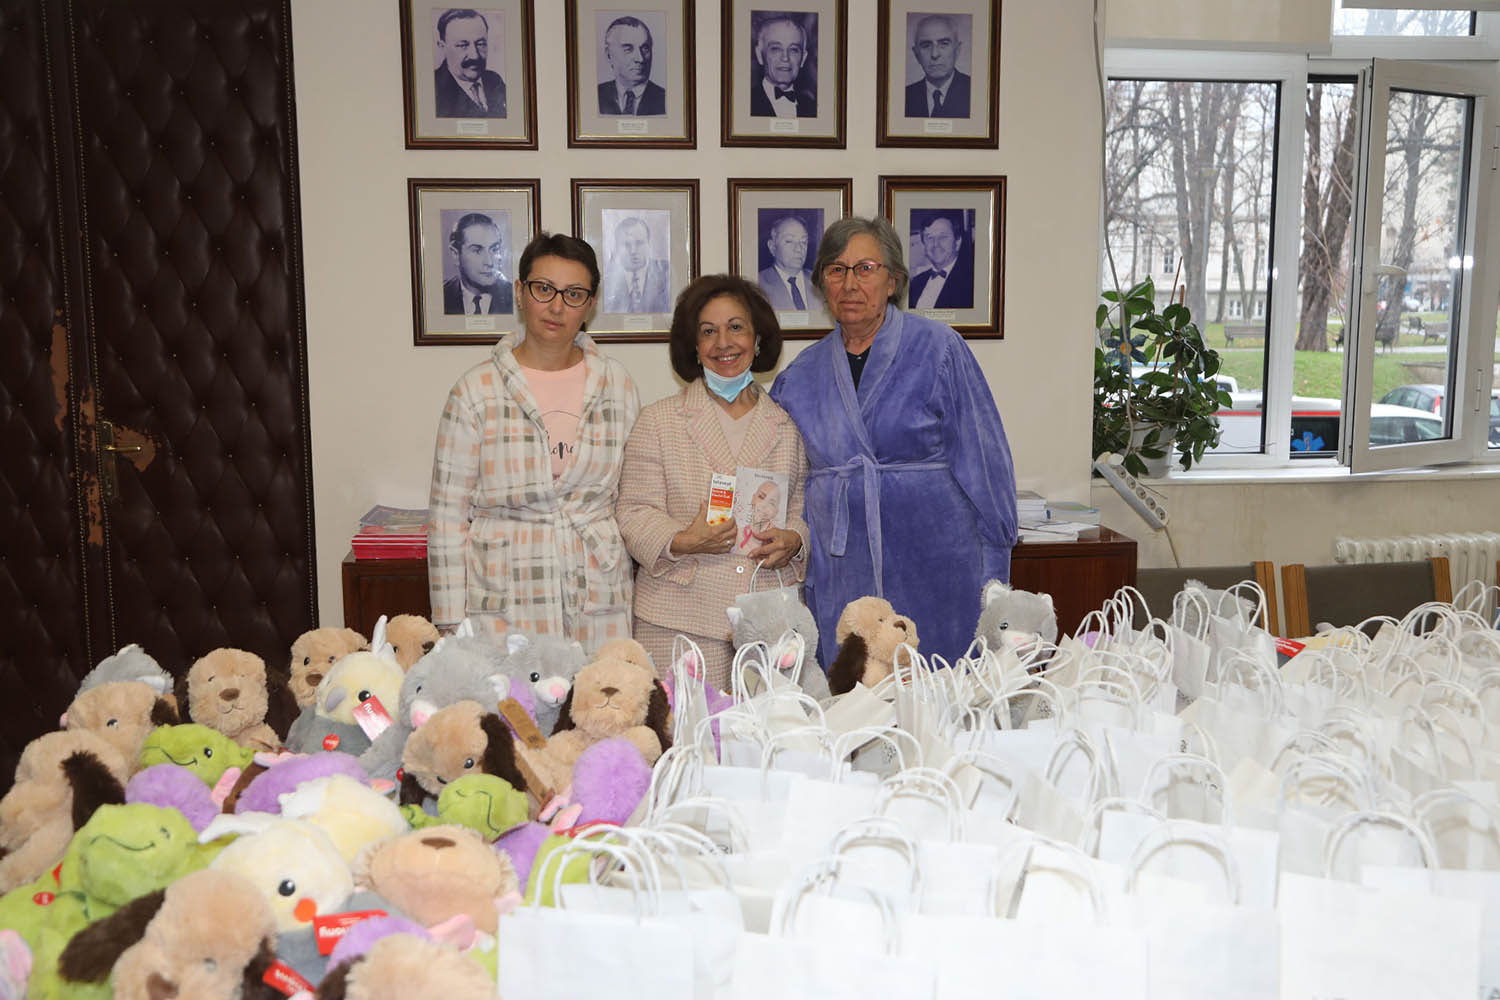 CROWN PRINCESS KATHERINE DELIVERS PRESENTS AT THE INSTITUTE FOR ONCOLOGY